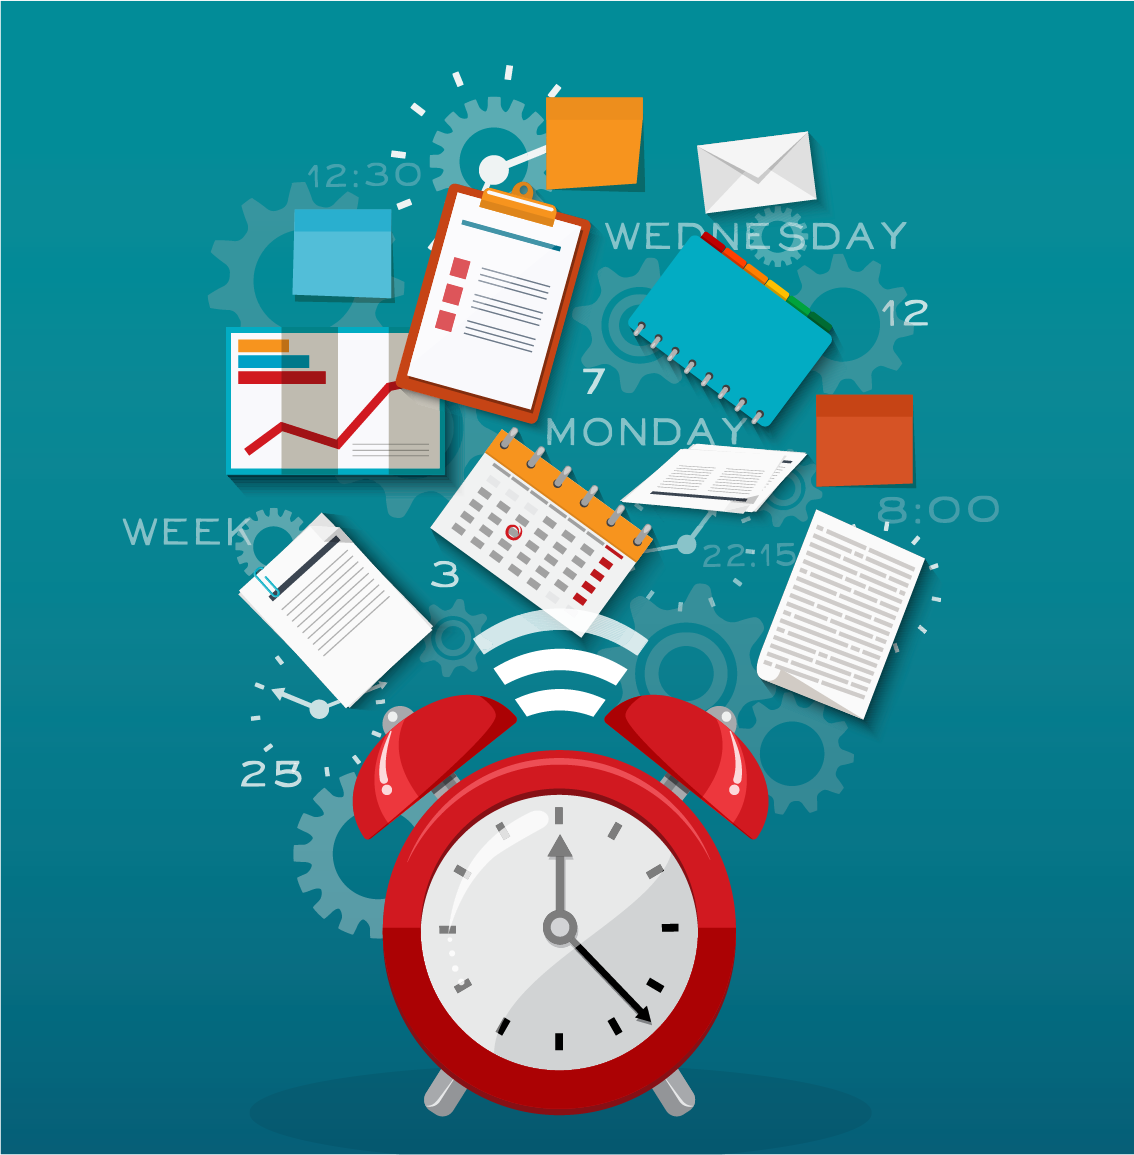 Manage Your Time and Happier